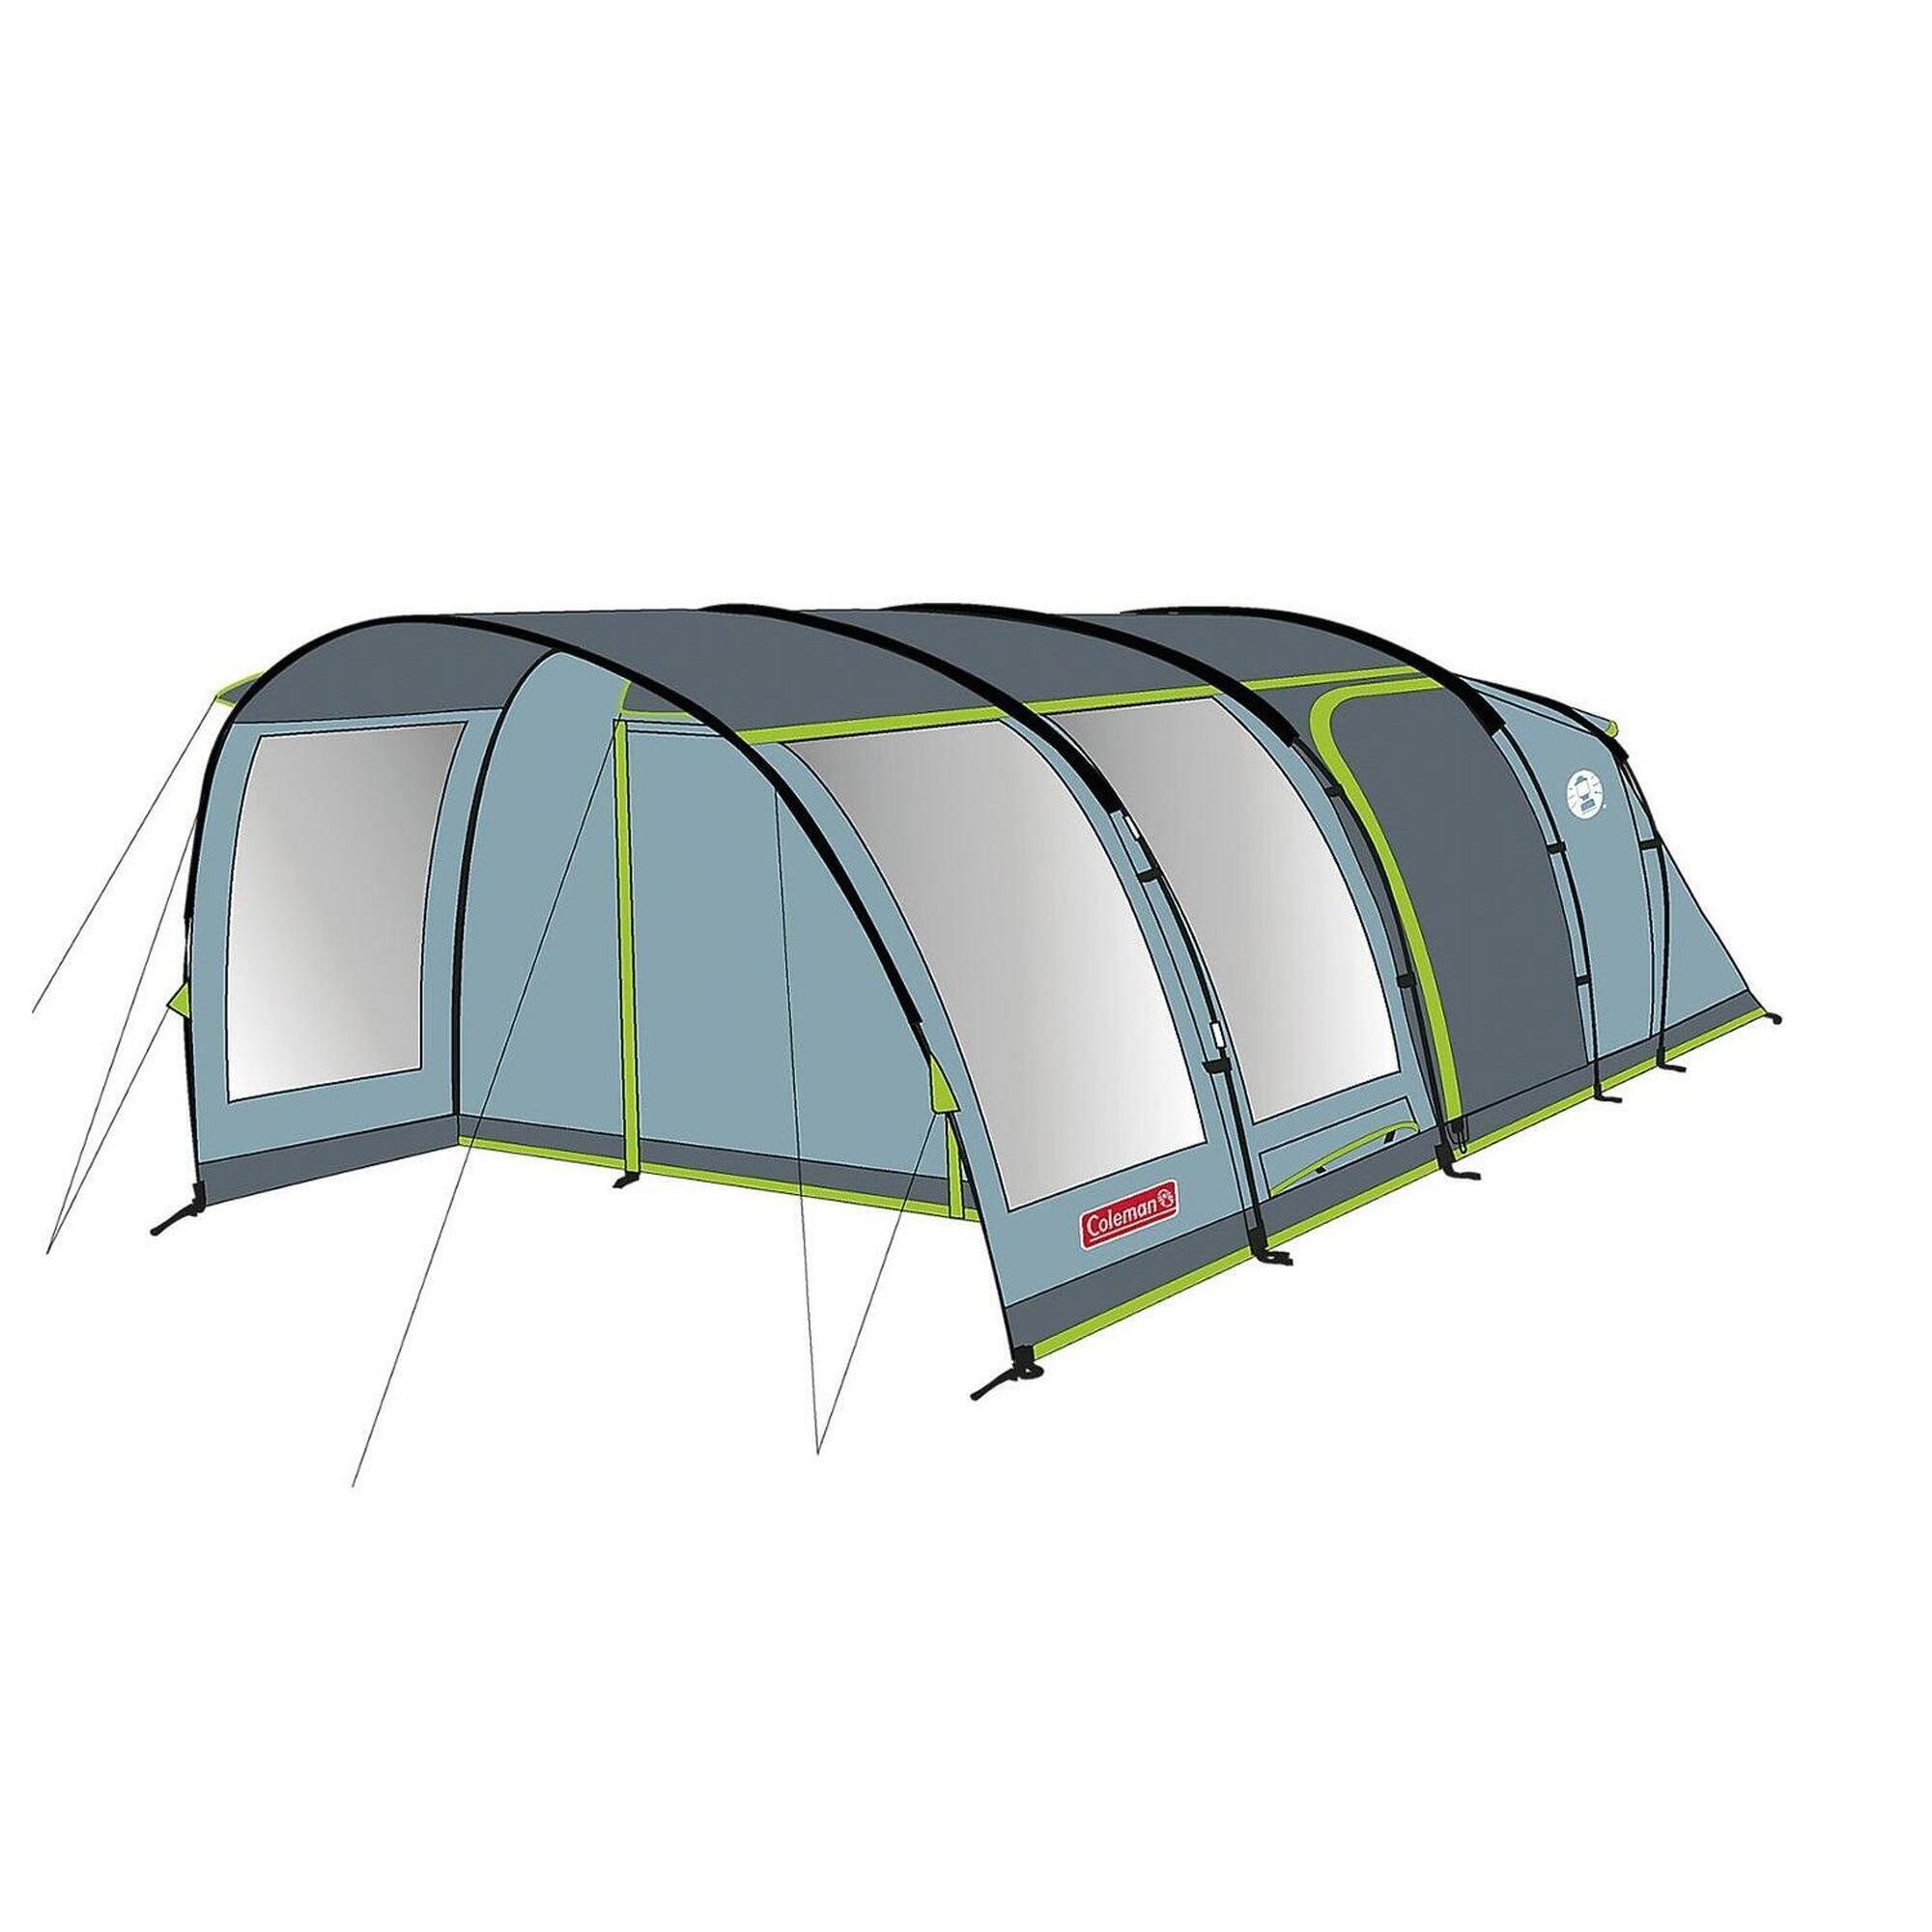 COLEMAN Coleman Meadowood 6 Person Family Tunnel Tent BlackOut